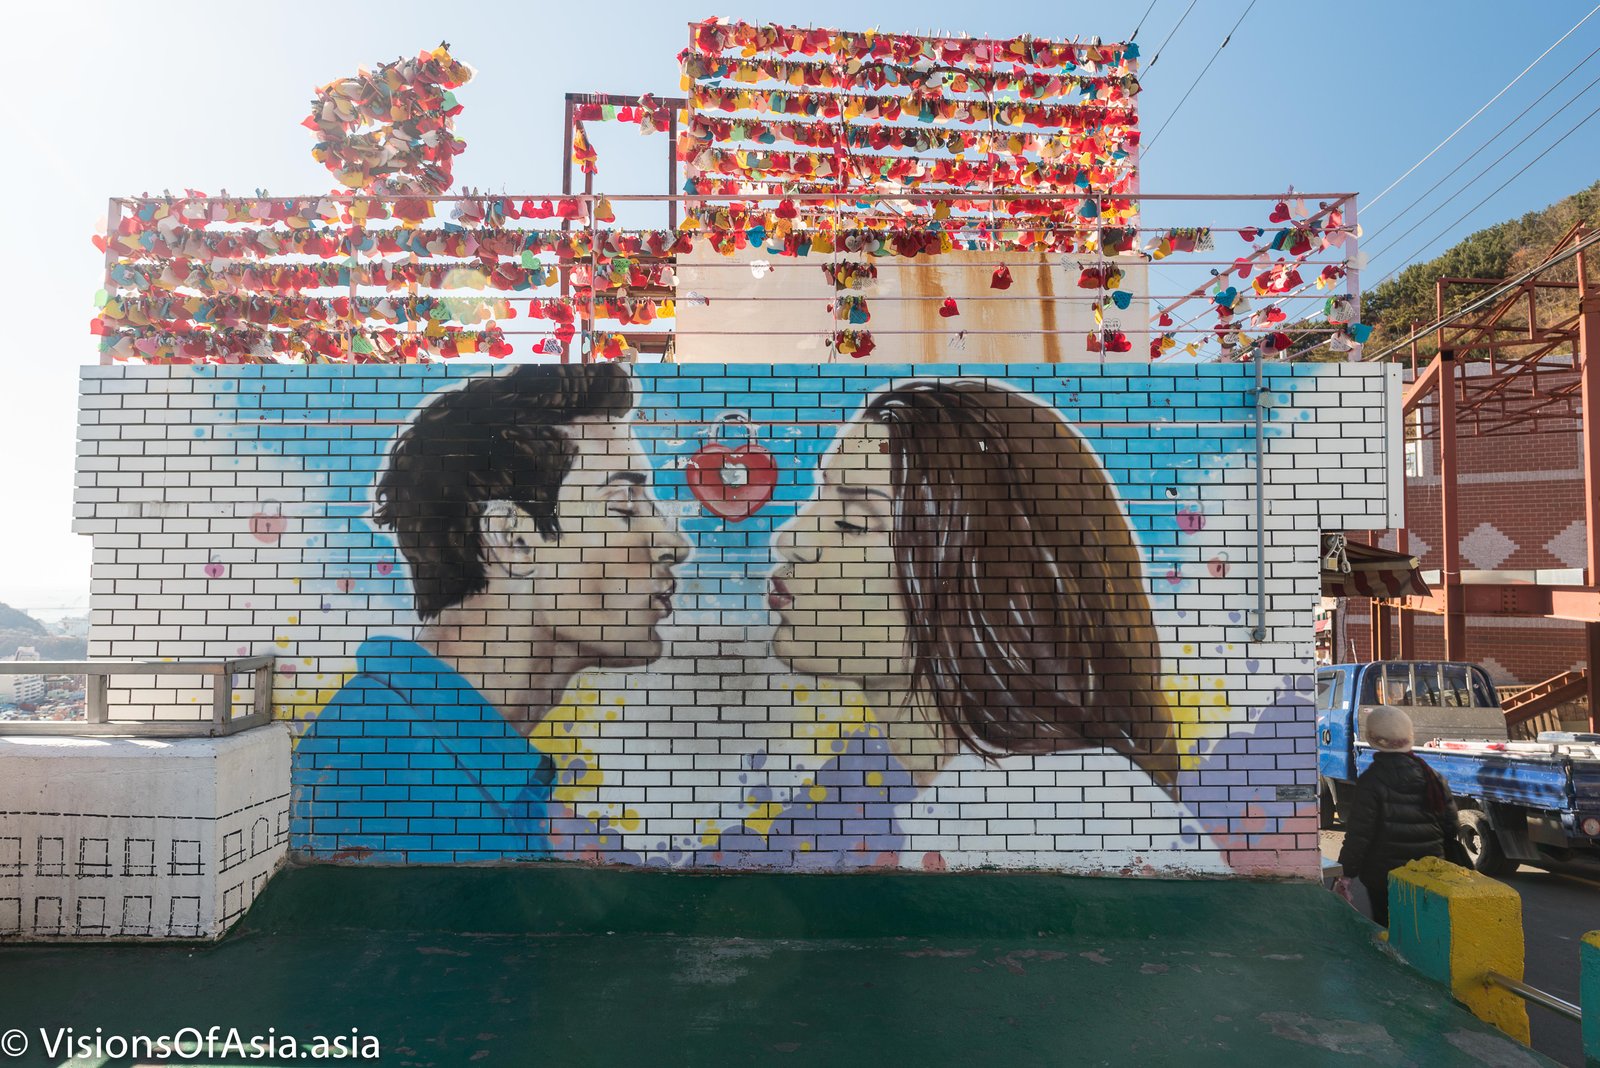 The Wall of Love in Gamcheon